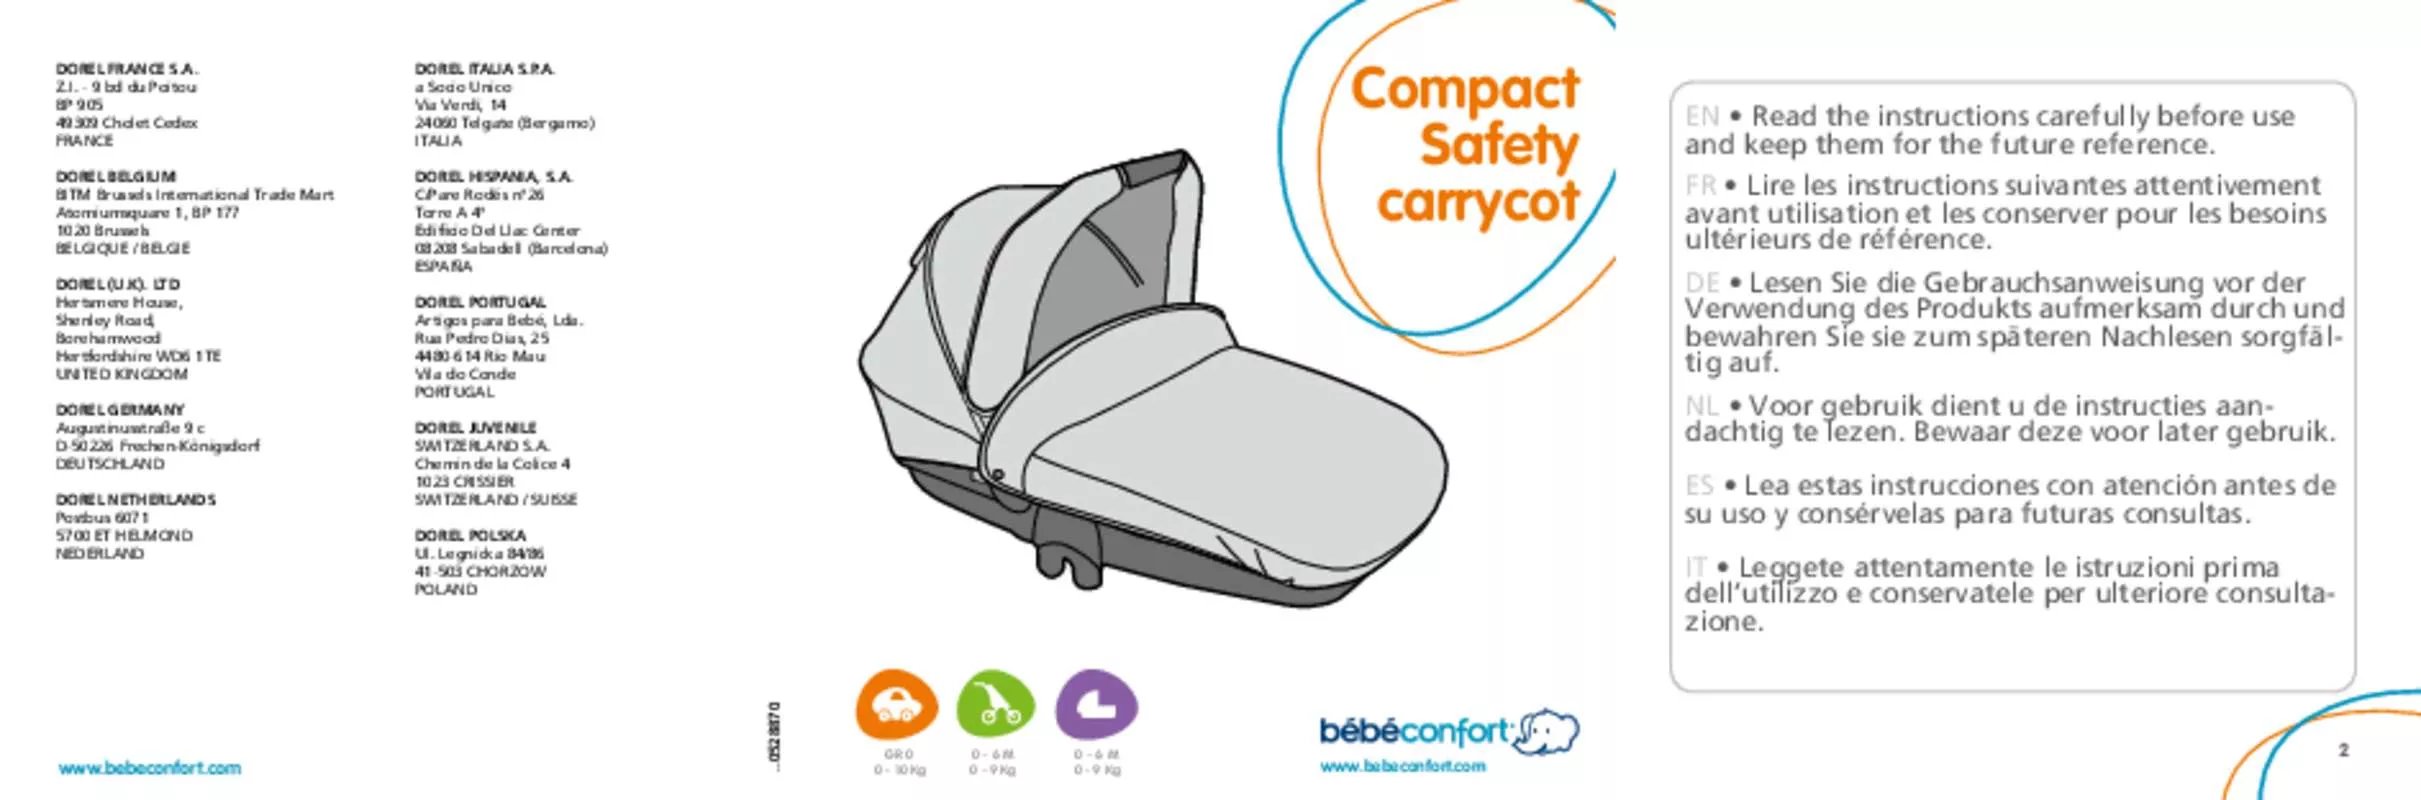 Mode d'emploi BEBECONFORT COMPACT SAFETY CARRYCOT